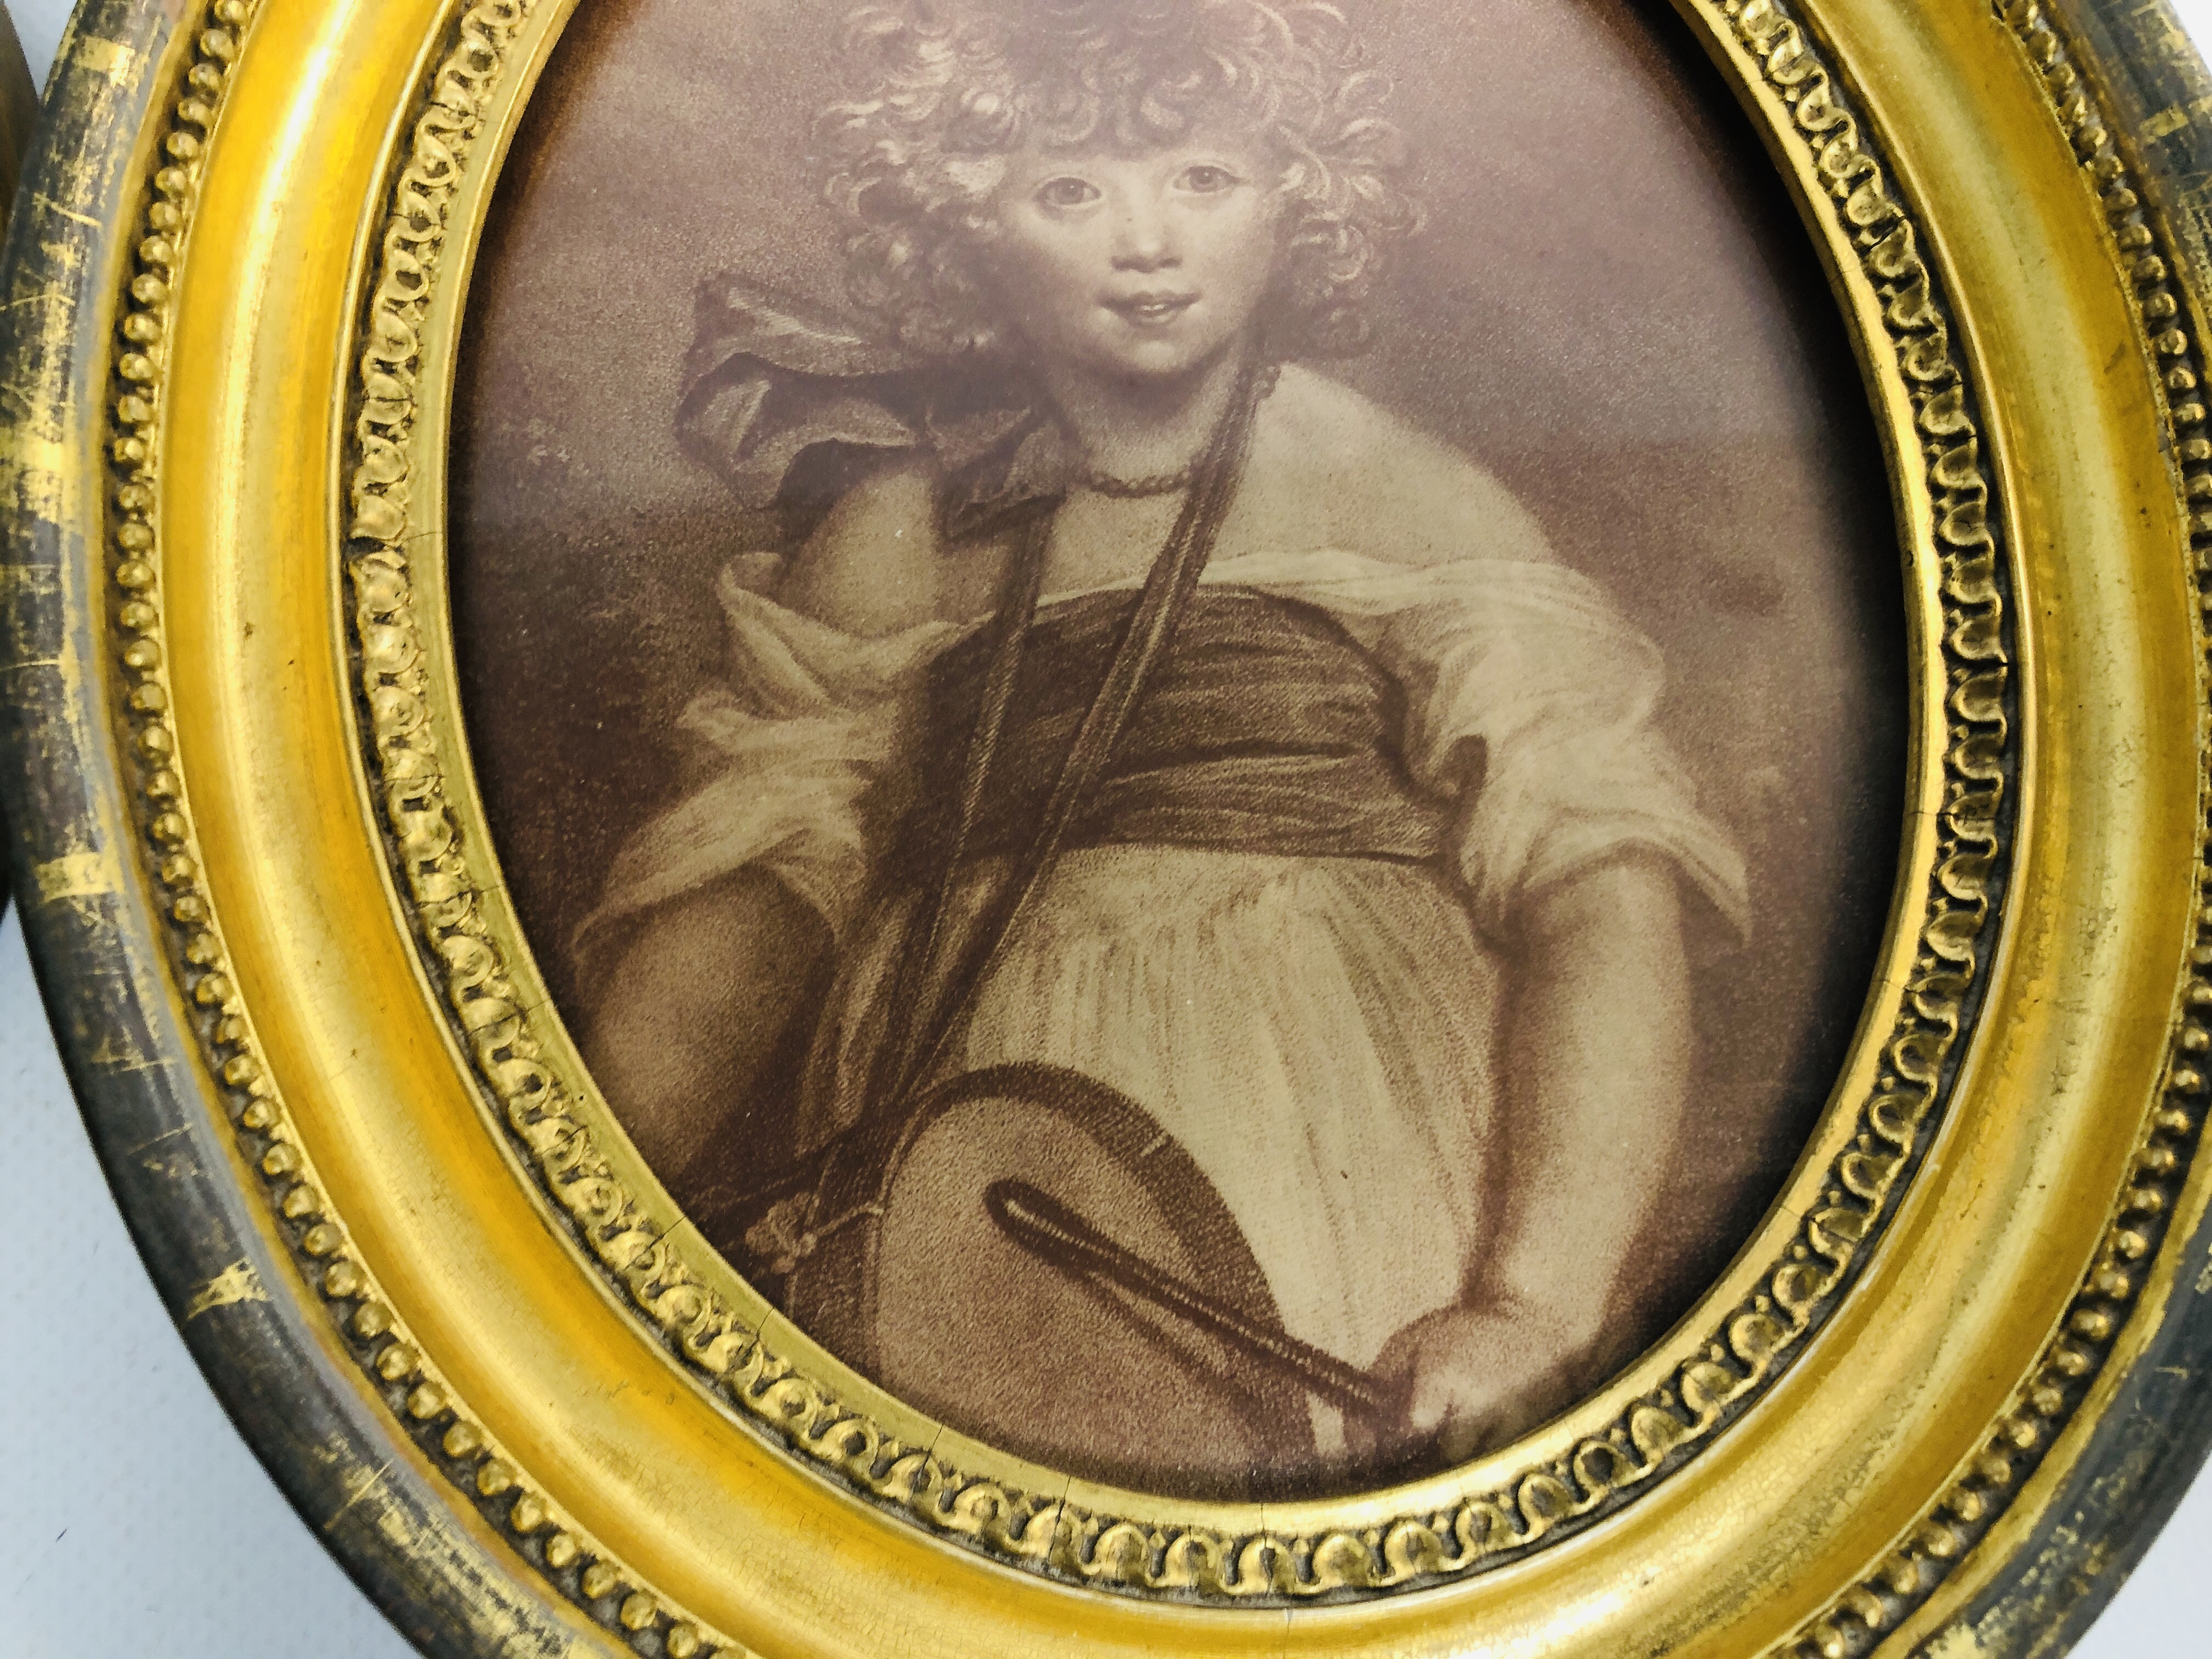 A PAIR OF C18th SEPIA PRINTS, A LADY AND A CHILD WITH A DRUM IN OVAL FRAMES, HEIGHT 25.5CM. - Image 7 of 8